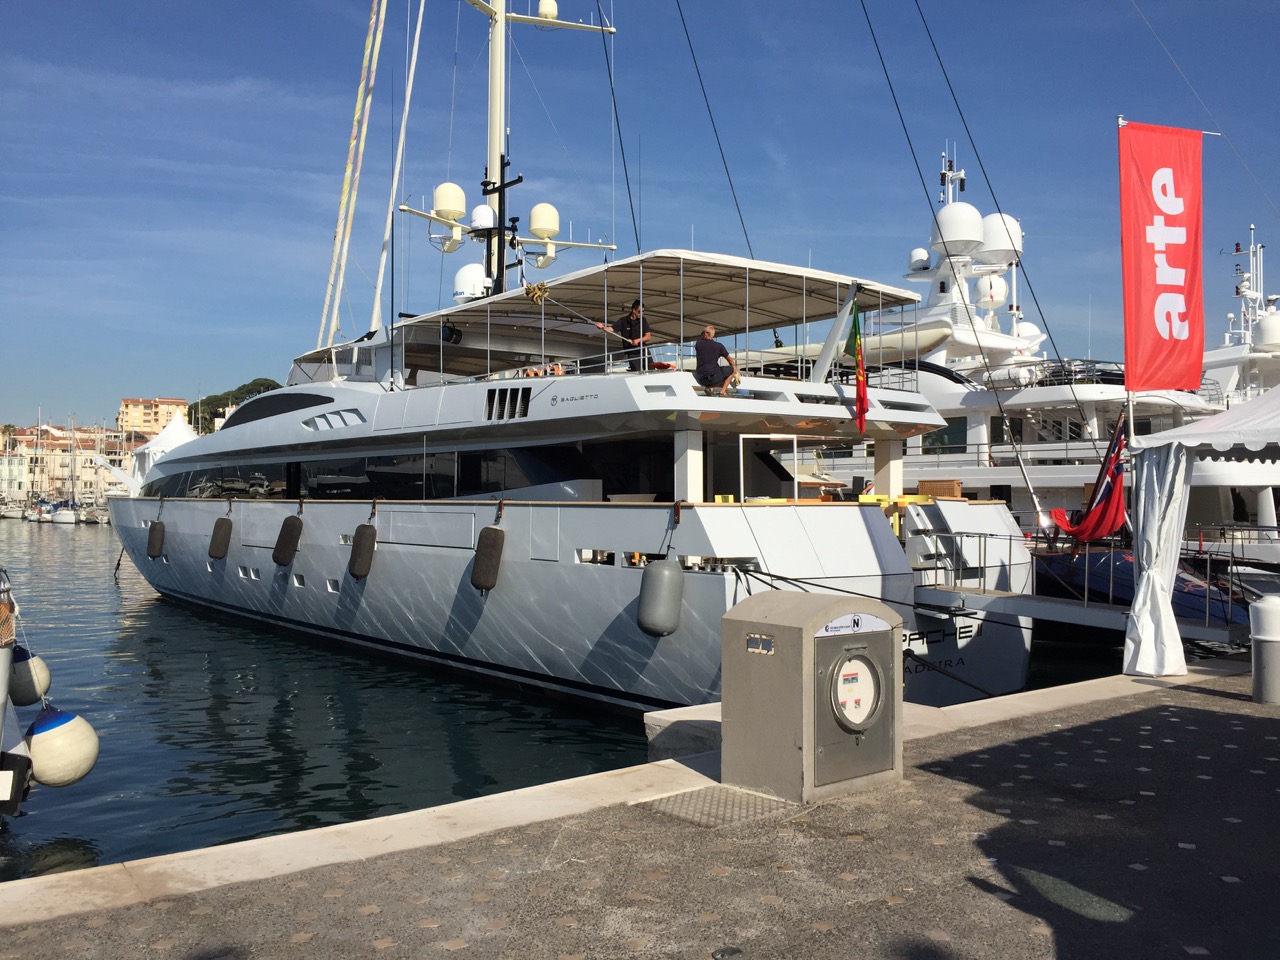 Last minute preparations on board this Baglietto for Cannes 2015